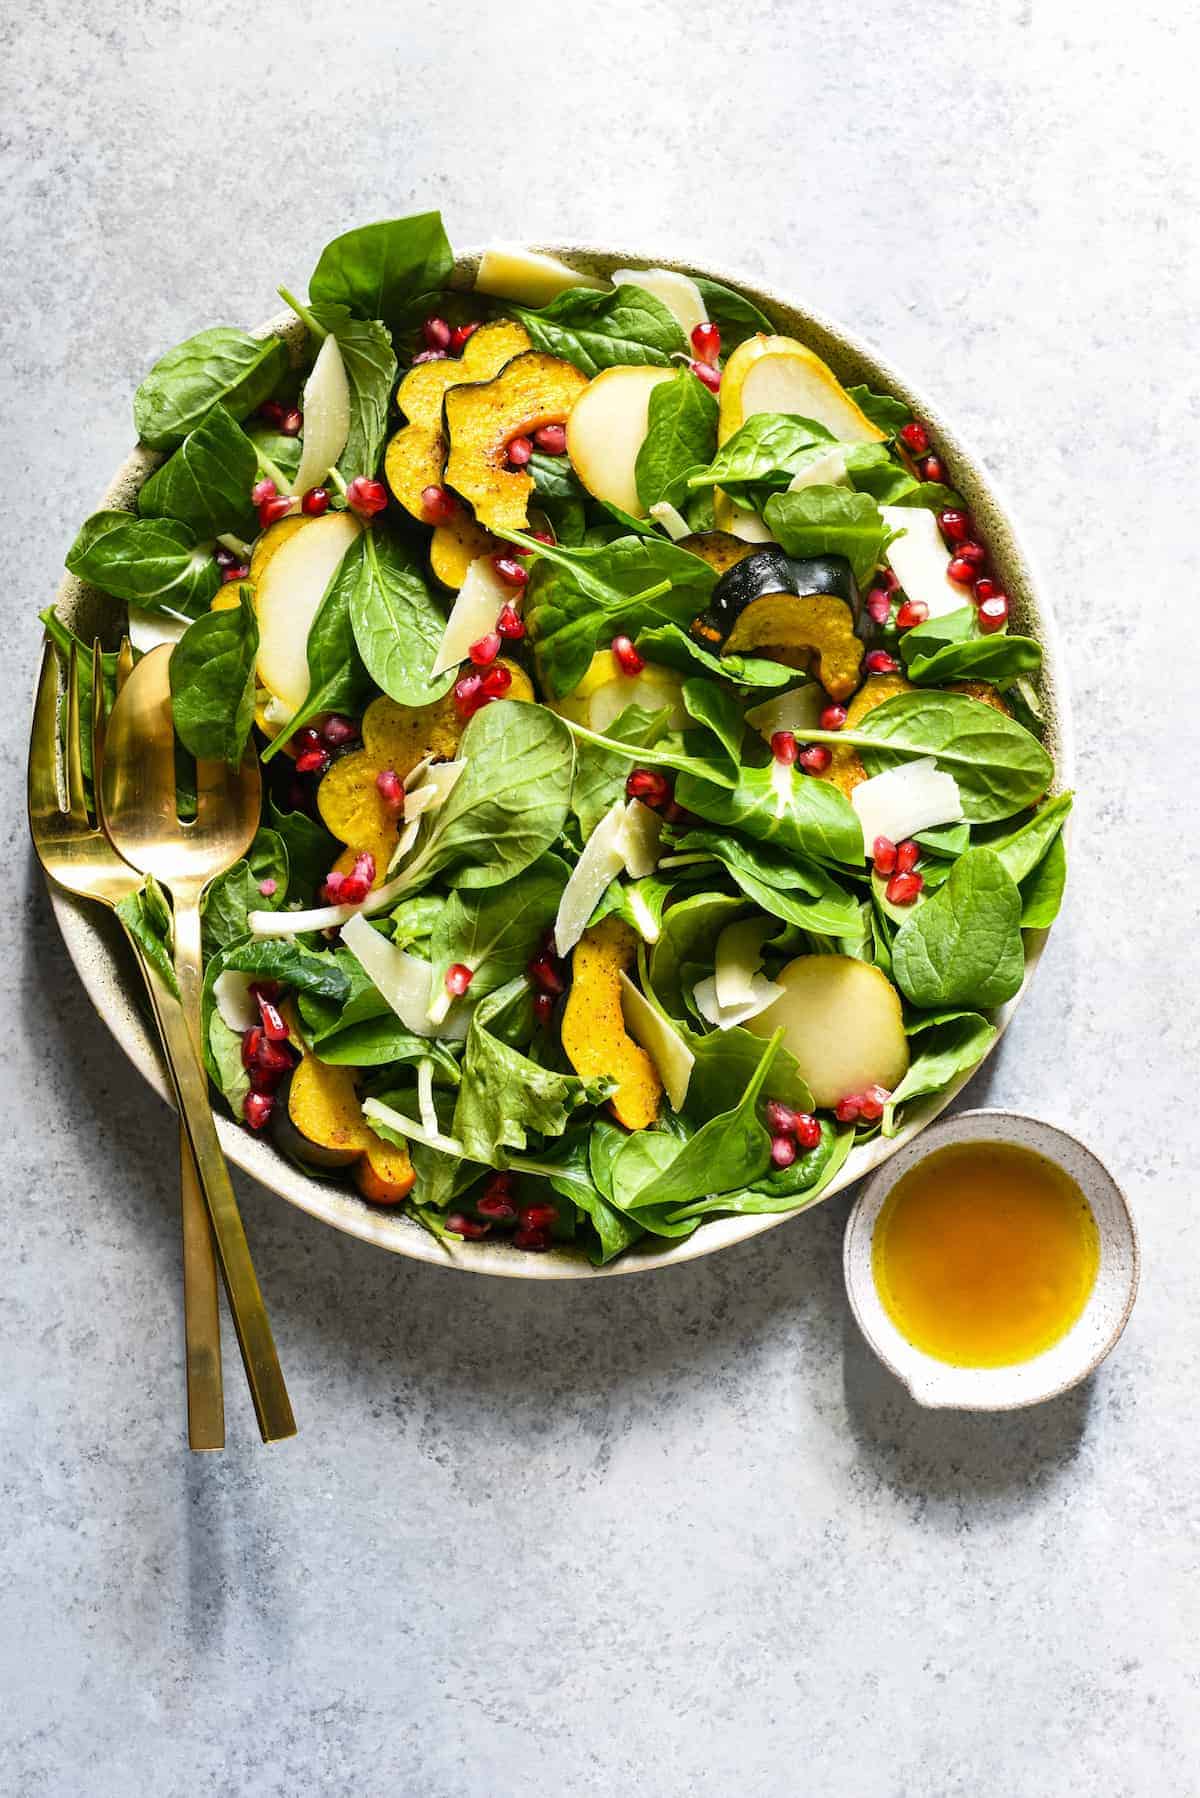 A bowl of greens in a stone bowl, topped with sliced acorn squash and pomegranate seeds. A dish of dressing and gold utensils on the side.